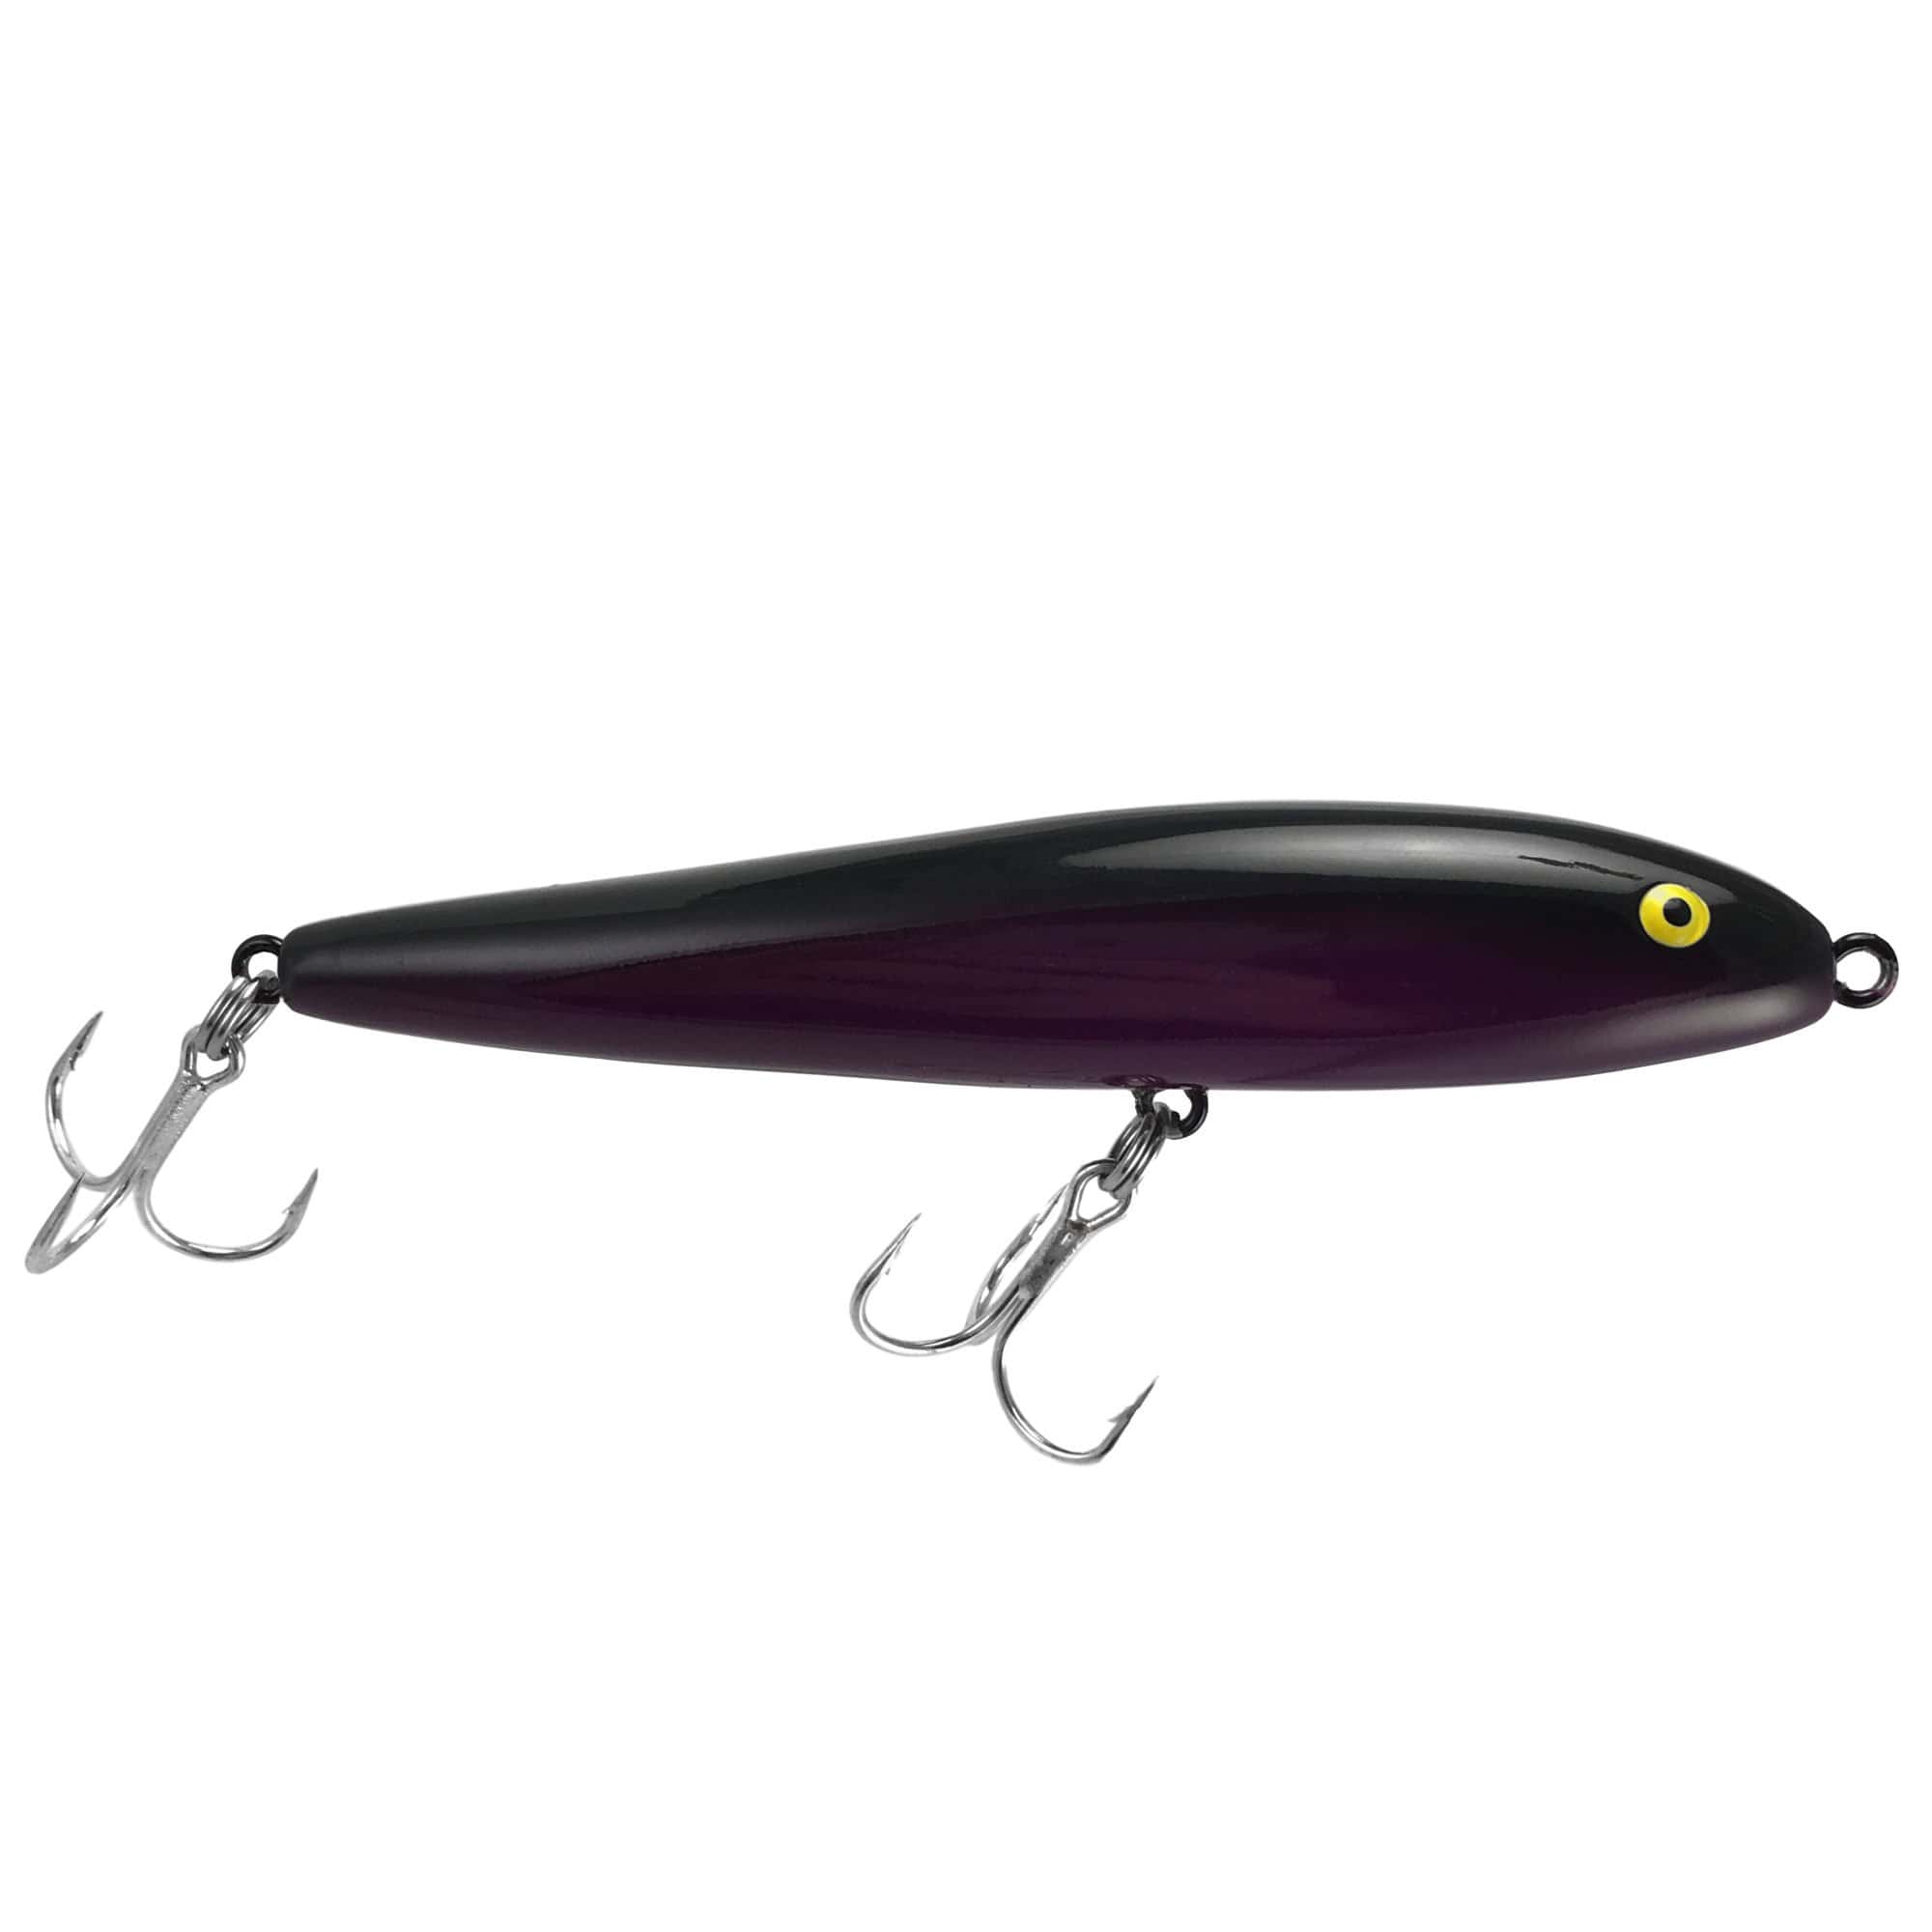 Heddon Super Spook Topwater Fishing Lure for Saltwater and Freshwater,  Clear, Super Spook (7/8 oz)